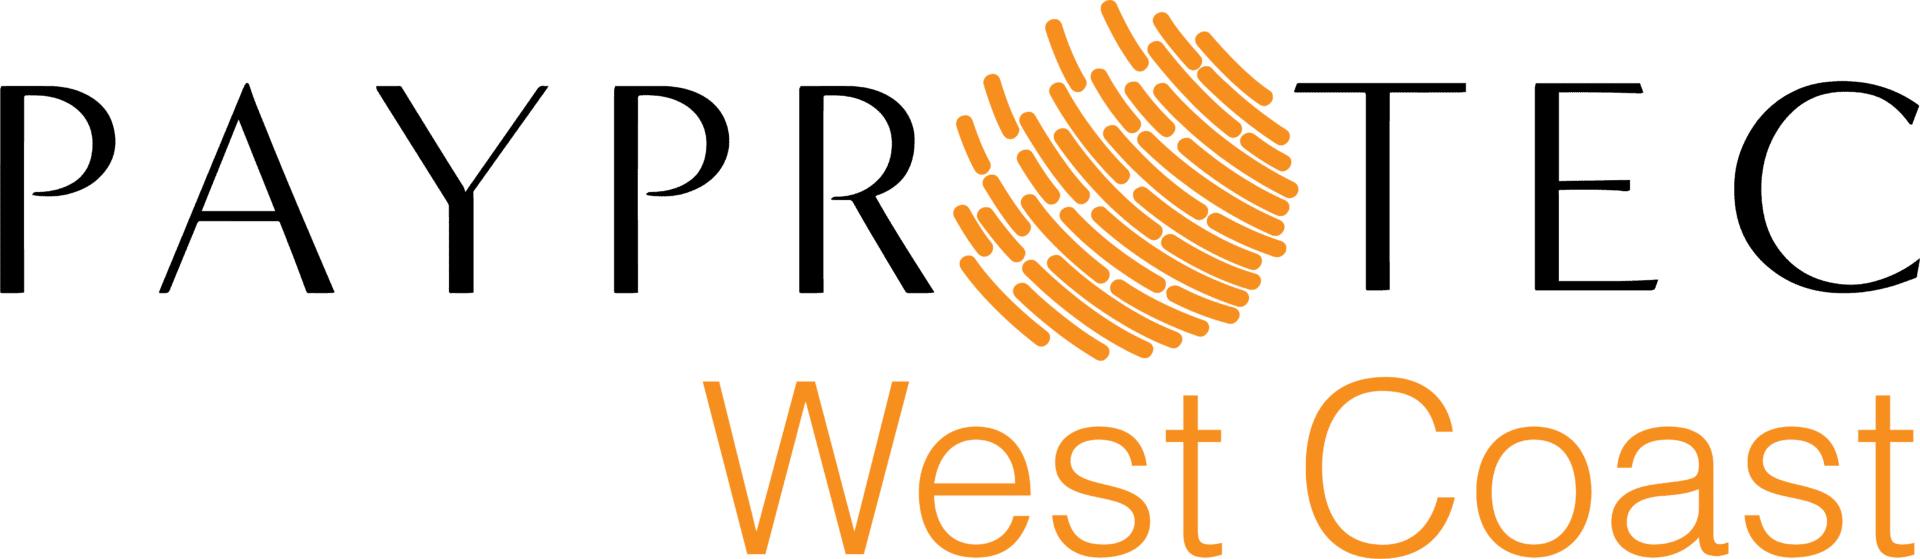 PayProTech West Coast